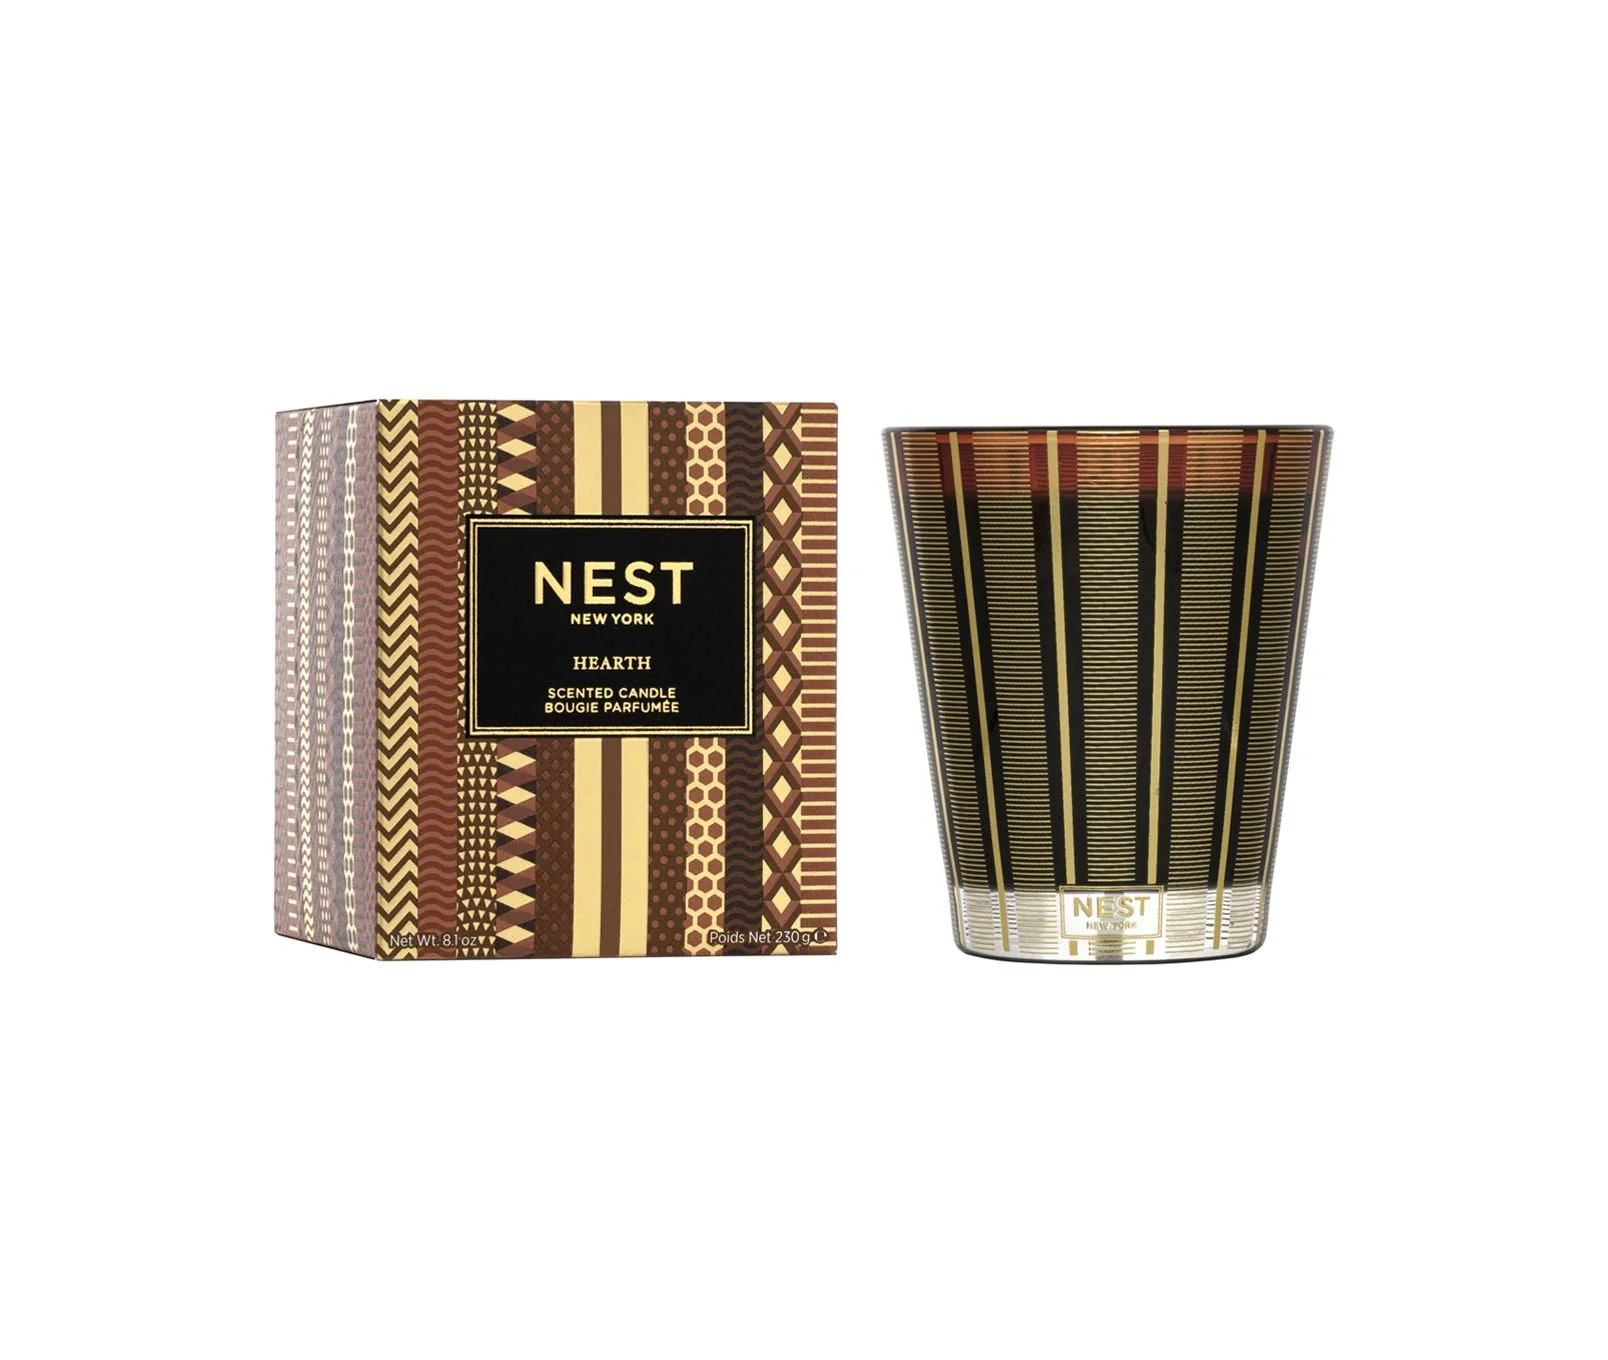 Hearth Classic Candle | NEST Fragrances